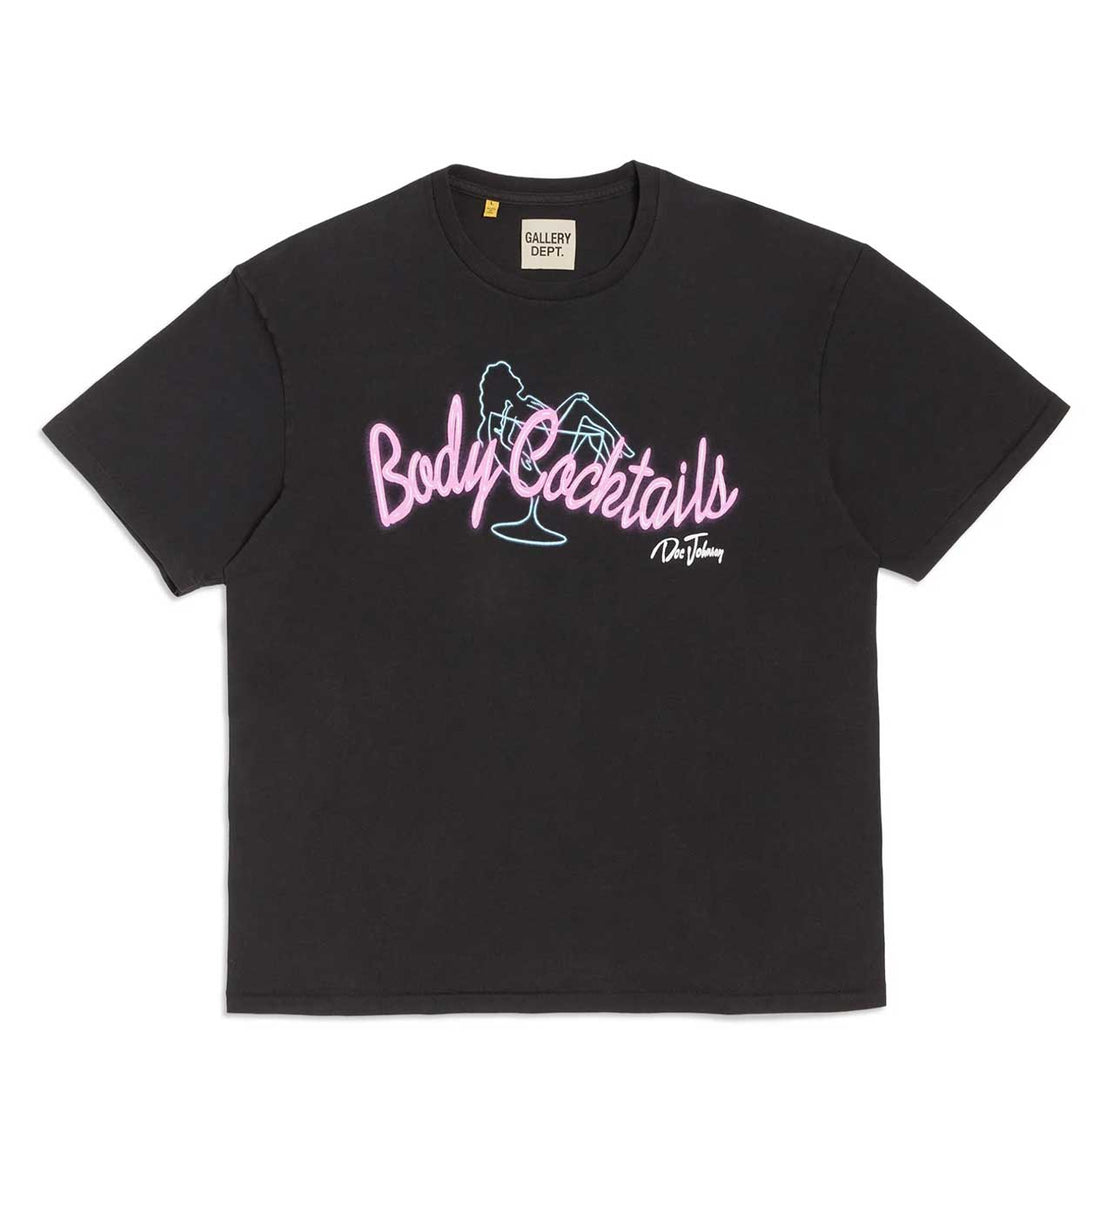 Product Image Of Gallery Dept Body Cocktails Black Tee Front View